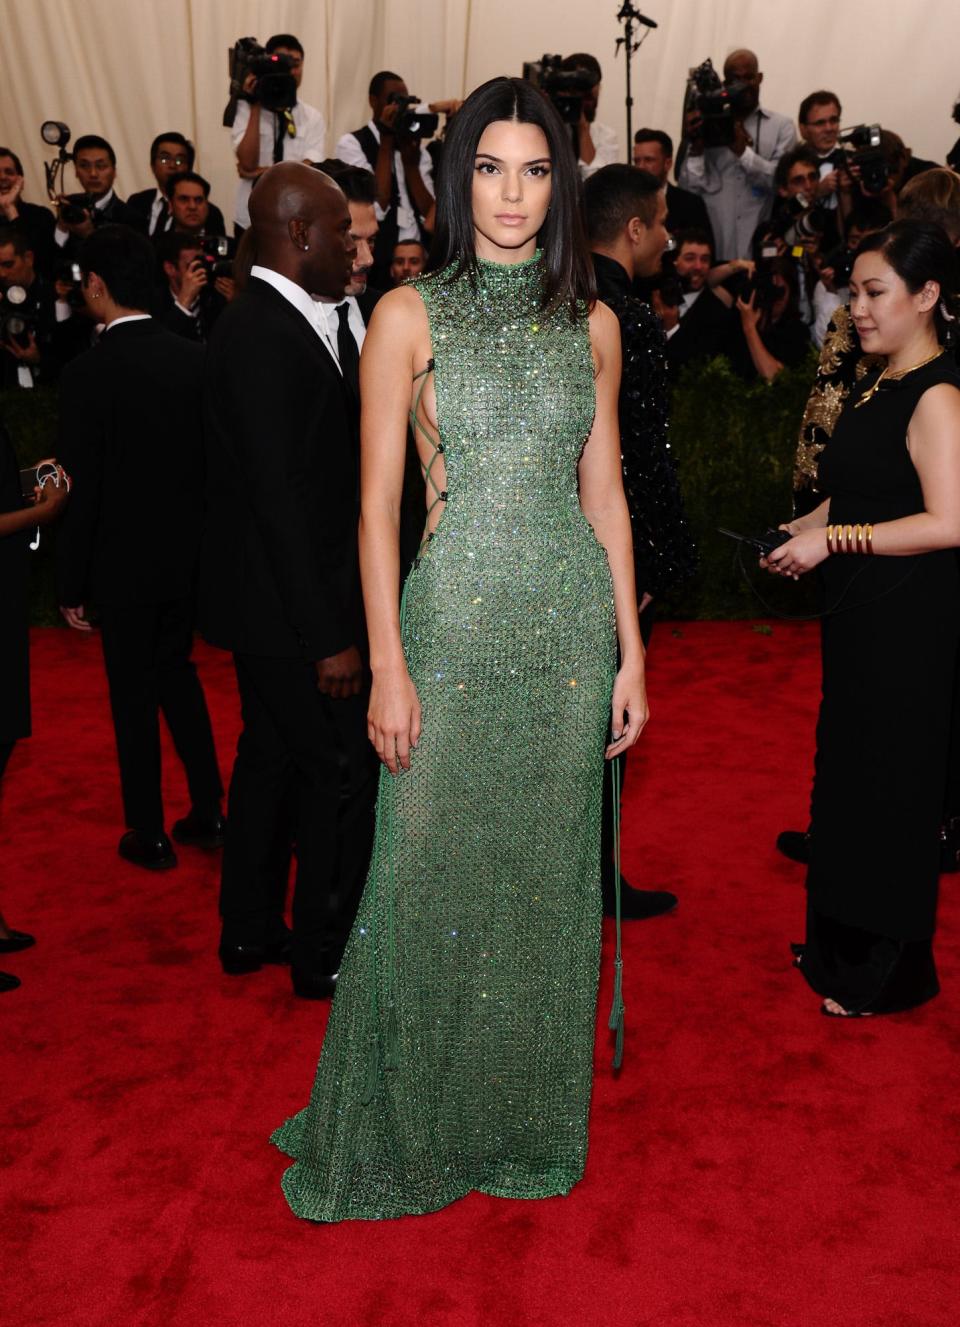 Kendall Jenner attends the Met Gala in New York City on May 4, 2015.